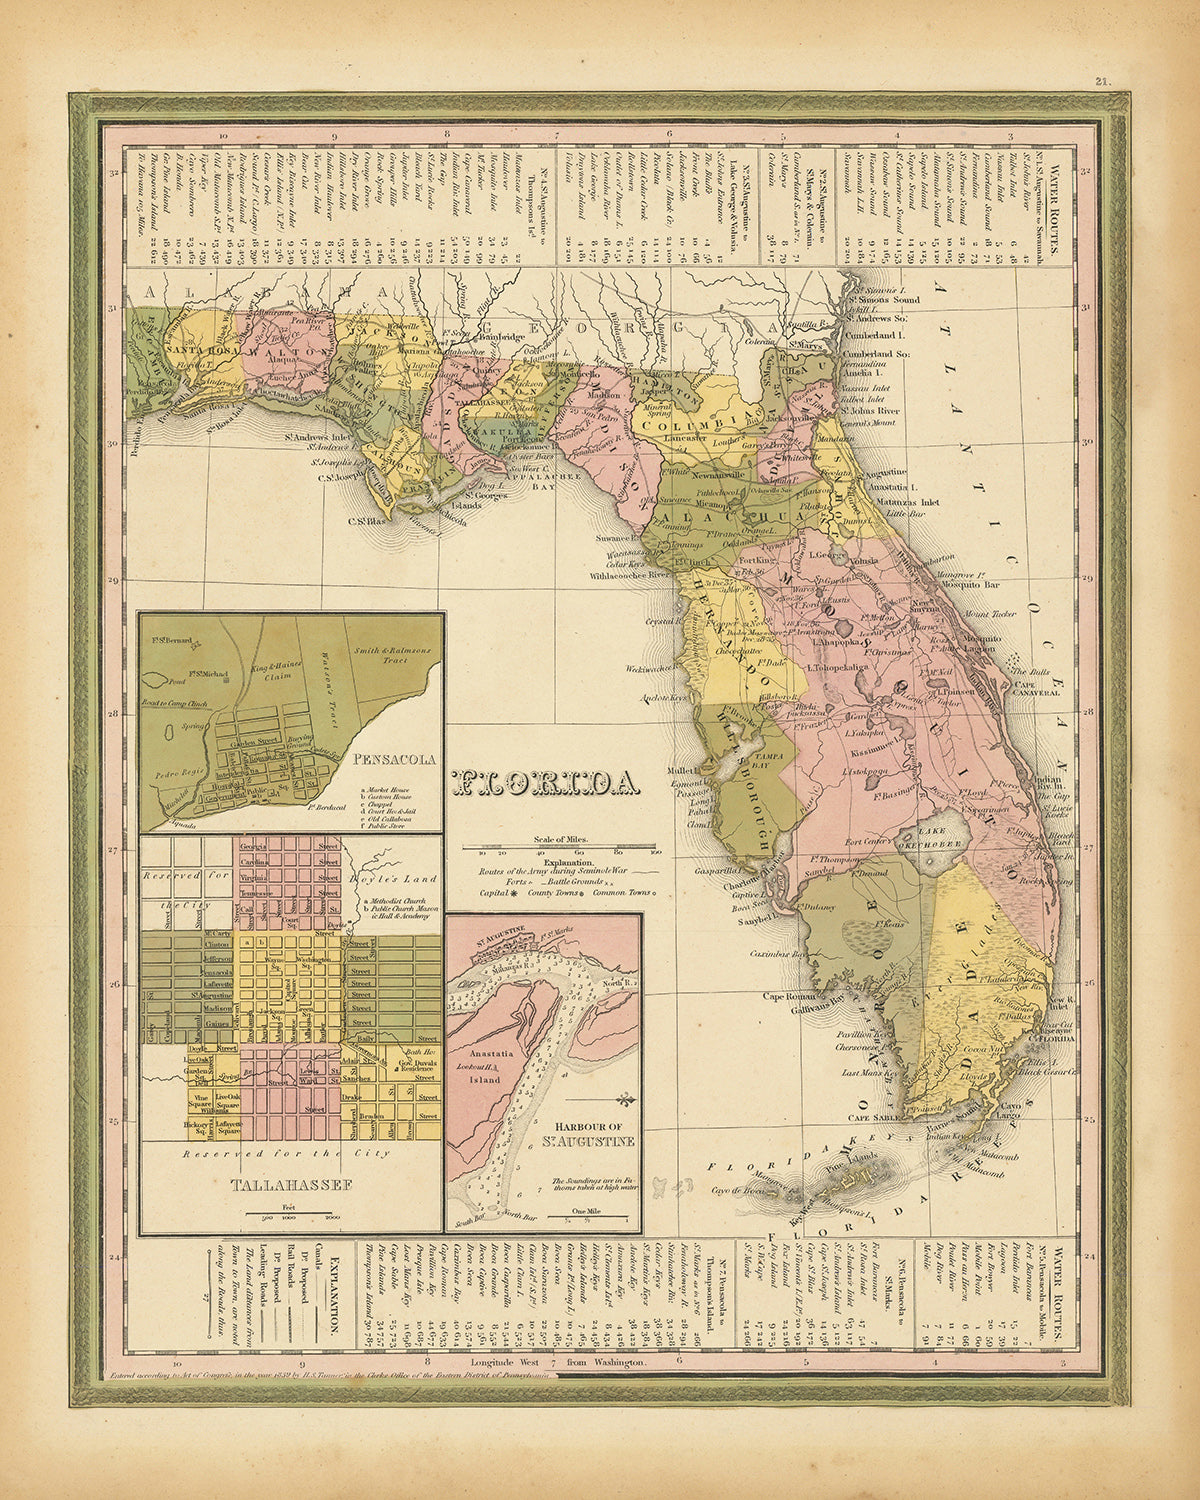 Old Map of Florida by H.S. Tanner, 1839: Miami, Tampa, Orlando, St. Petersburg, Jacksonville, Cayo Lago, Keys